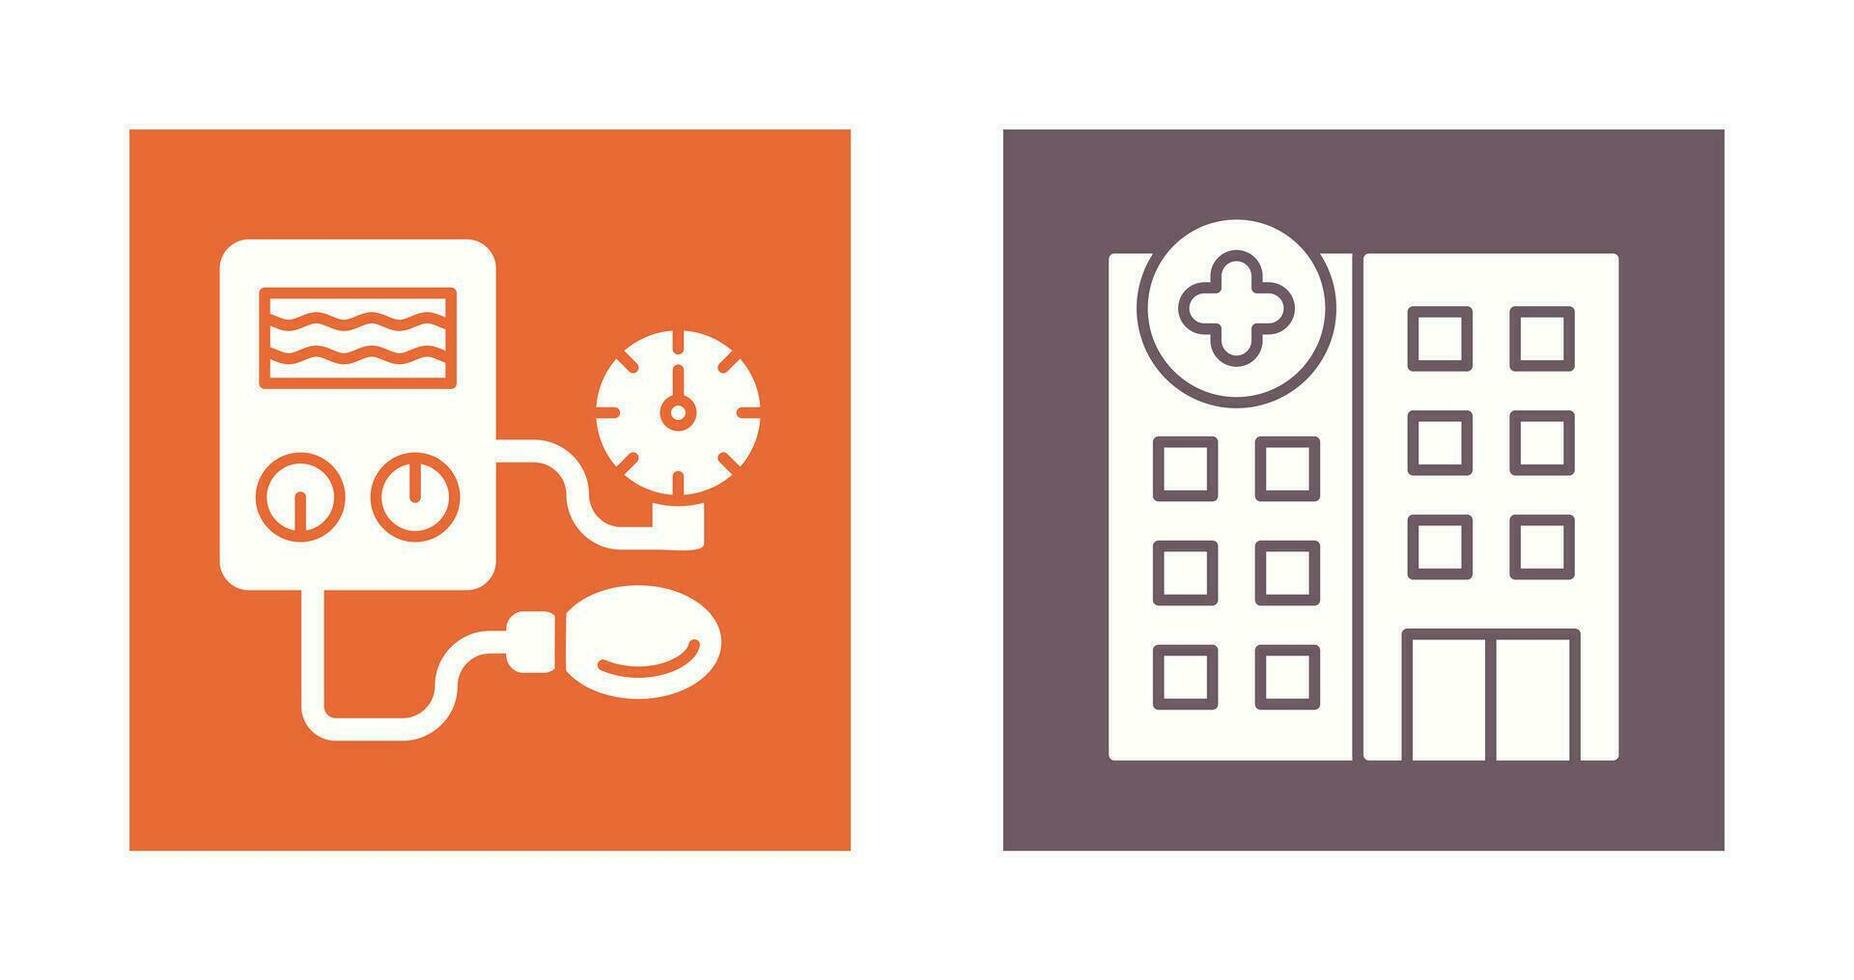 Arterial Pressure and Hospital Icon vector